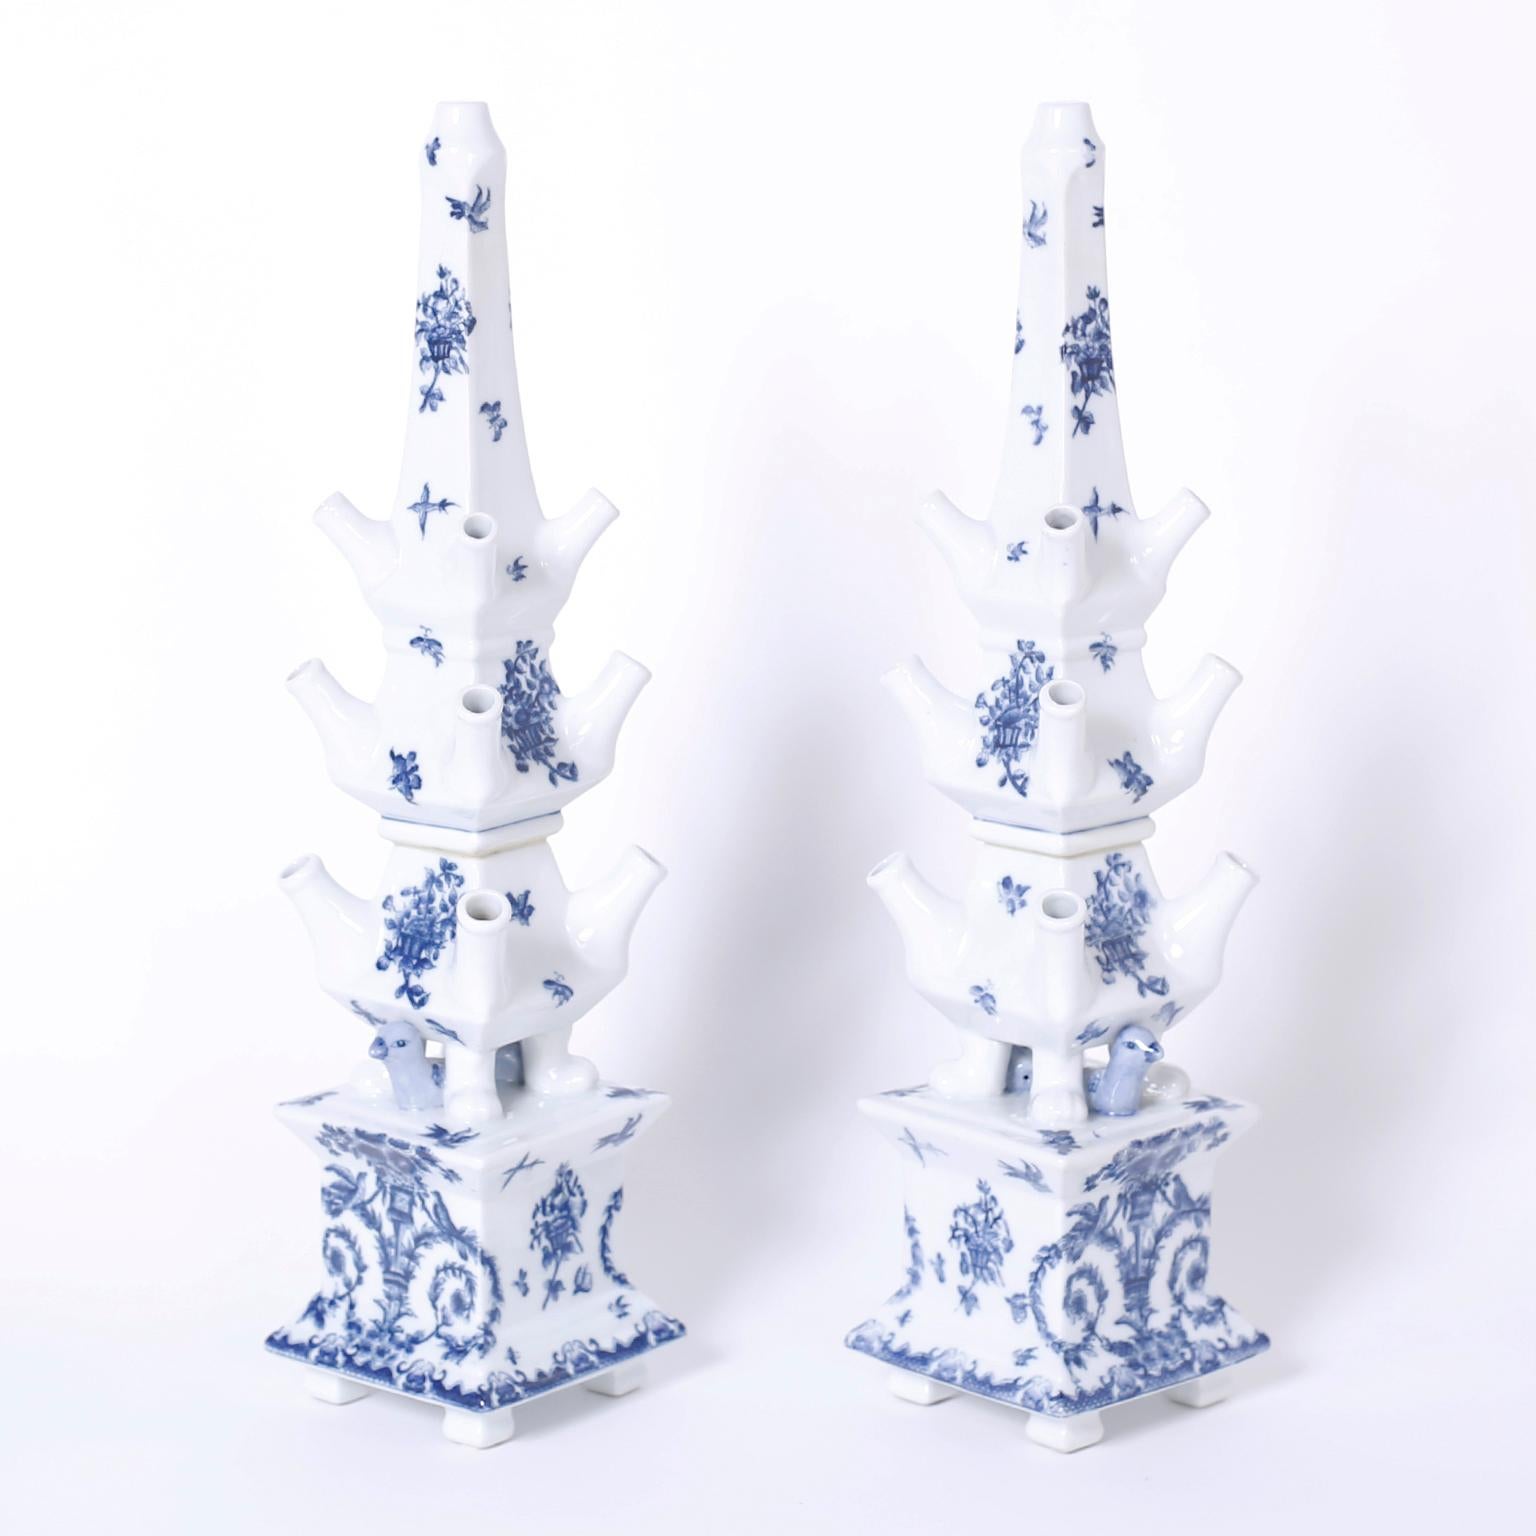 Pair of blue and white tulipieres with a pagoda or obelisk form and featuring song birds at the front and back and hand decorated with delicate fauna and flora designs.